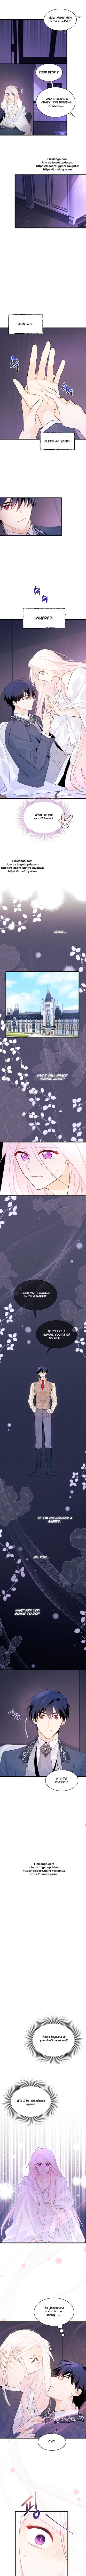 A Symbiotic Relationship Between A Rabbit And A Black Panther Chapter 37.5 page 2